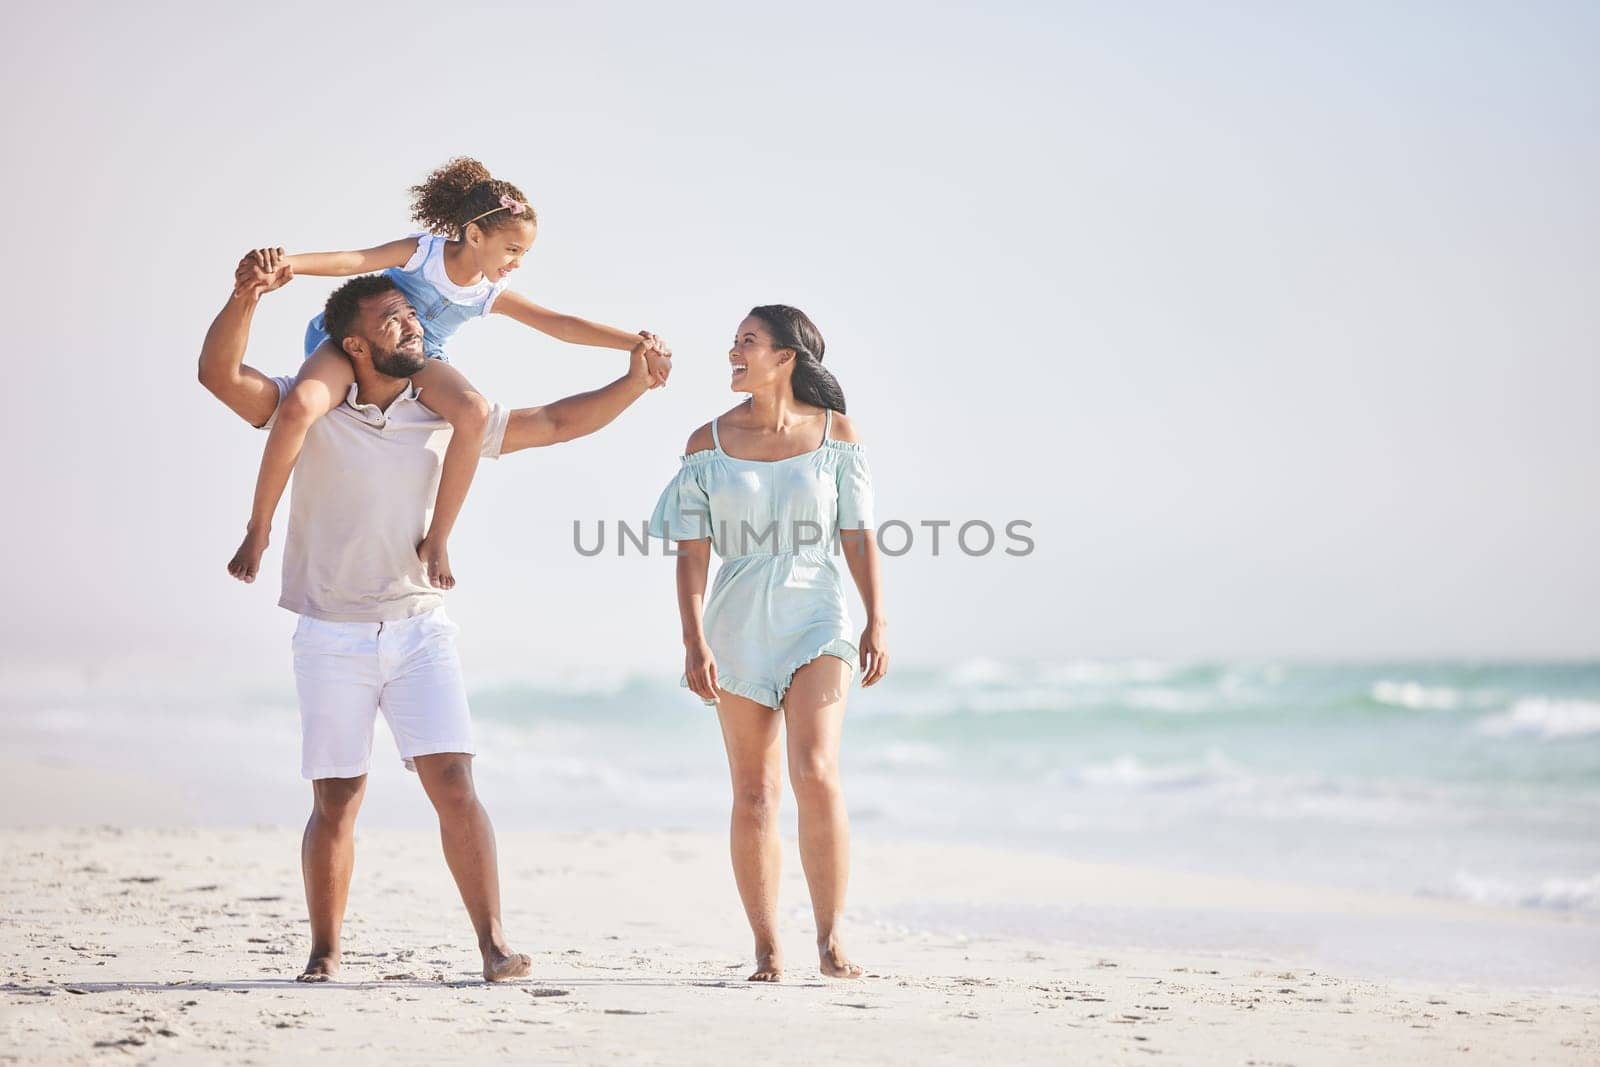 Holding hands, beach or parents walking with a girl for a holiday vacation together with happiness. Piggyback, mother and father playing or enjoying family time with a happy child or kid in summer.